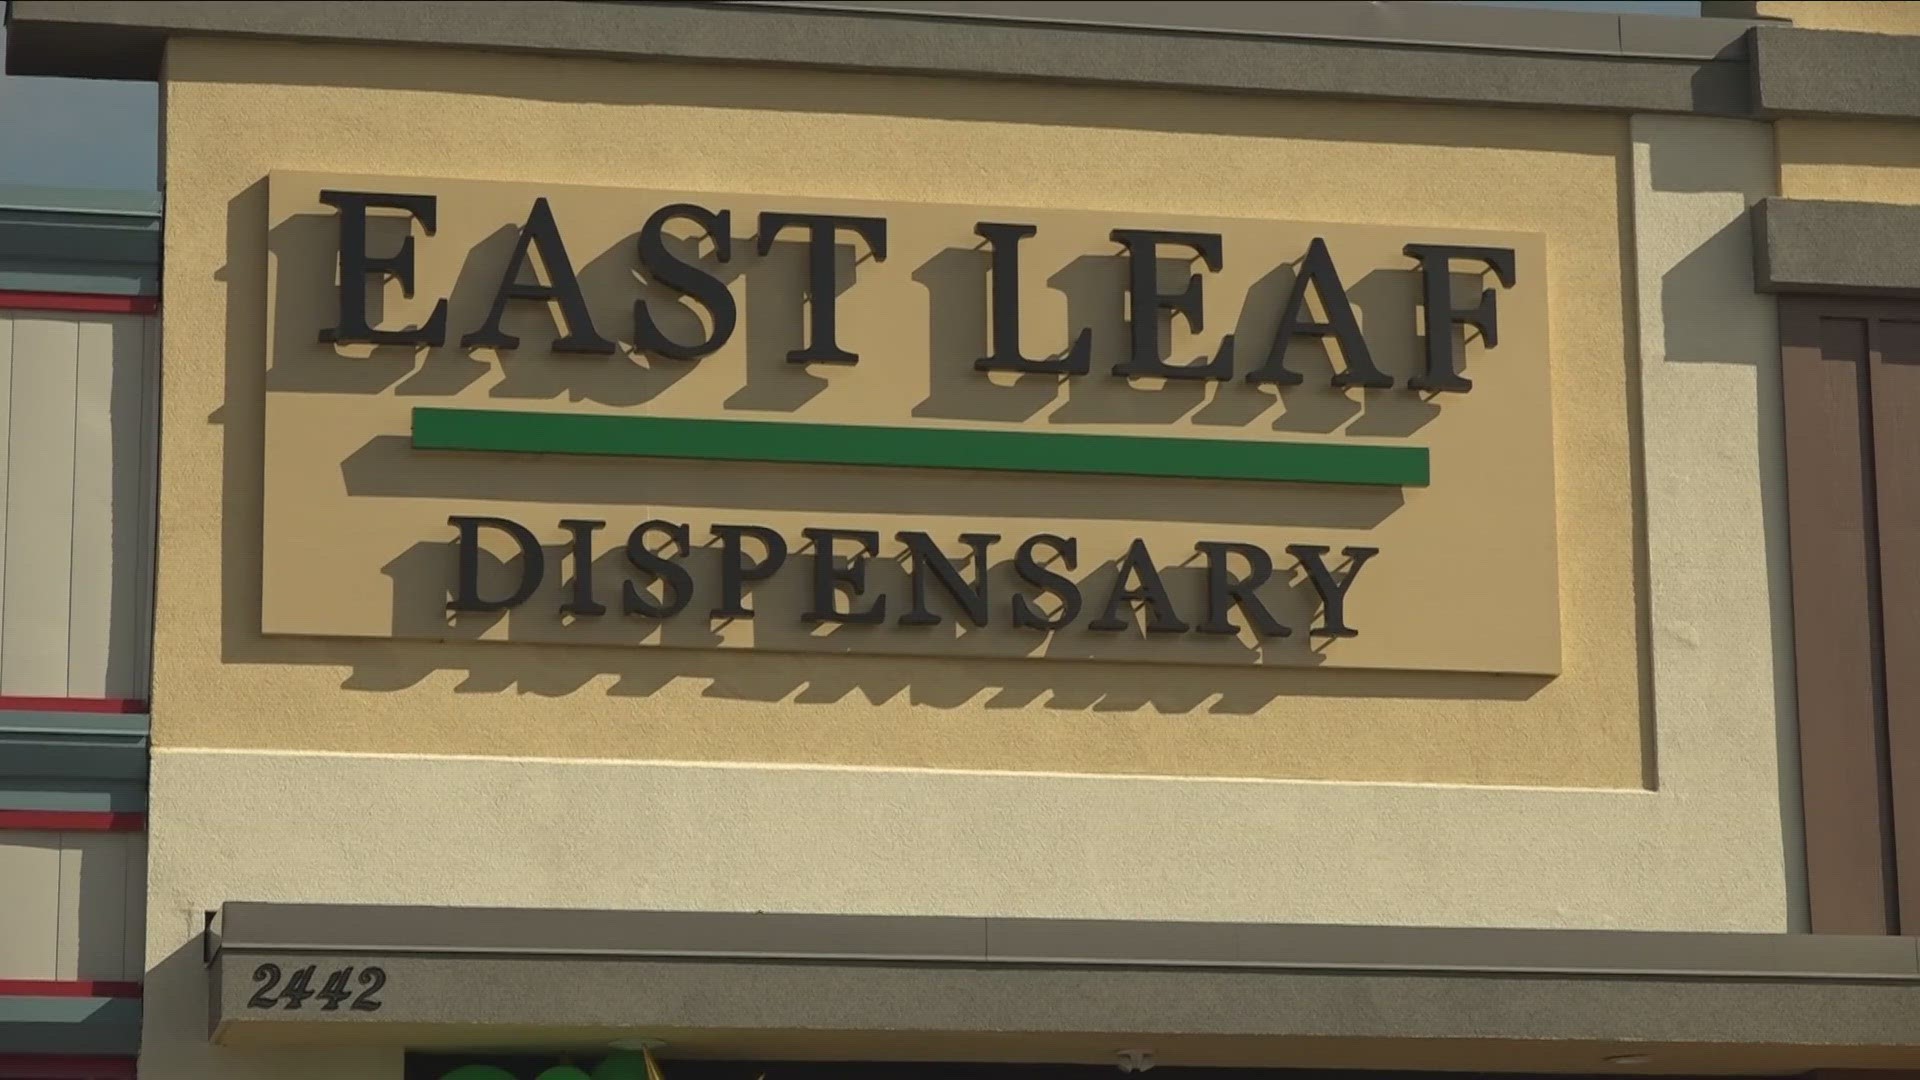 The first recreational marijuana shop in Cheektowaga is now open. Another one opened Friday in West Seneca.